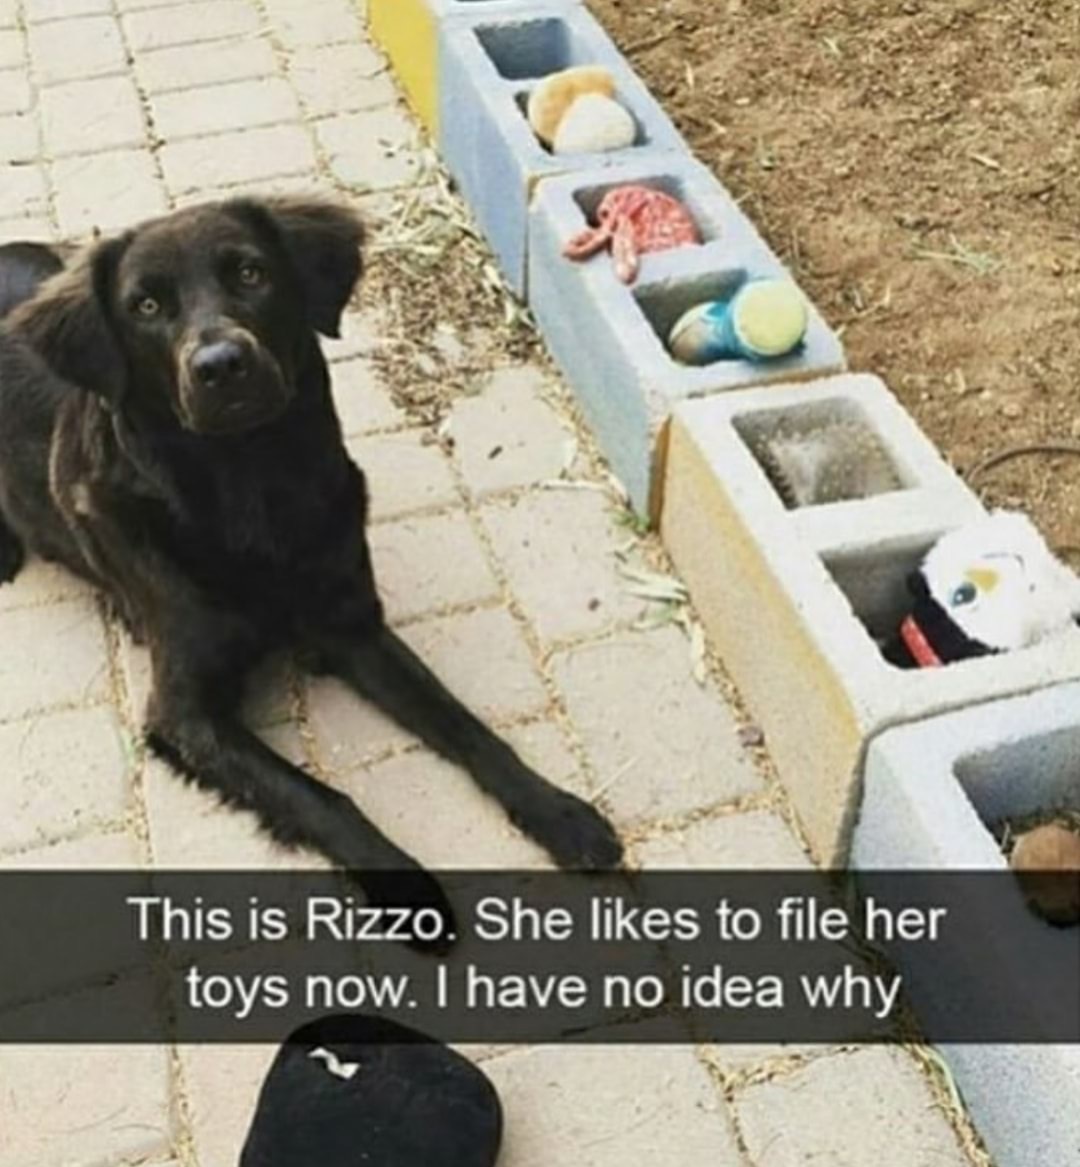 dog organization meme - This is Rizzo. She to file her toys now. I have no idea why